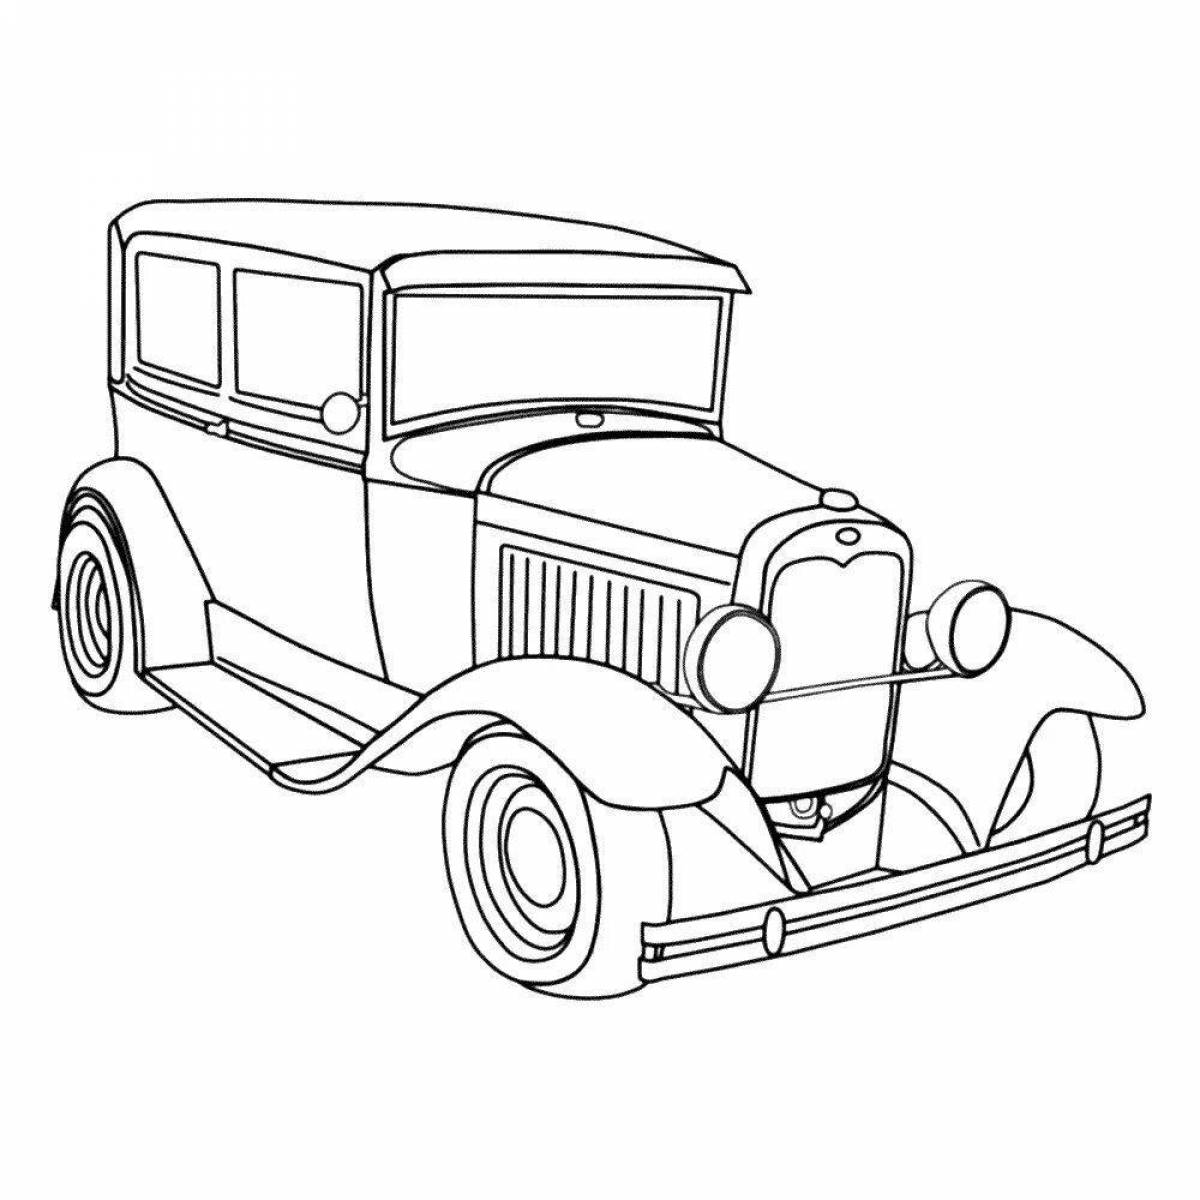 Coloring page majestic vintage cars